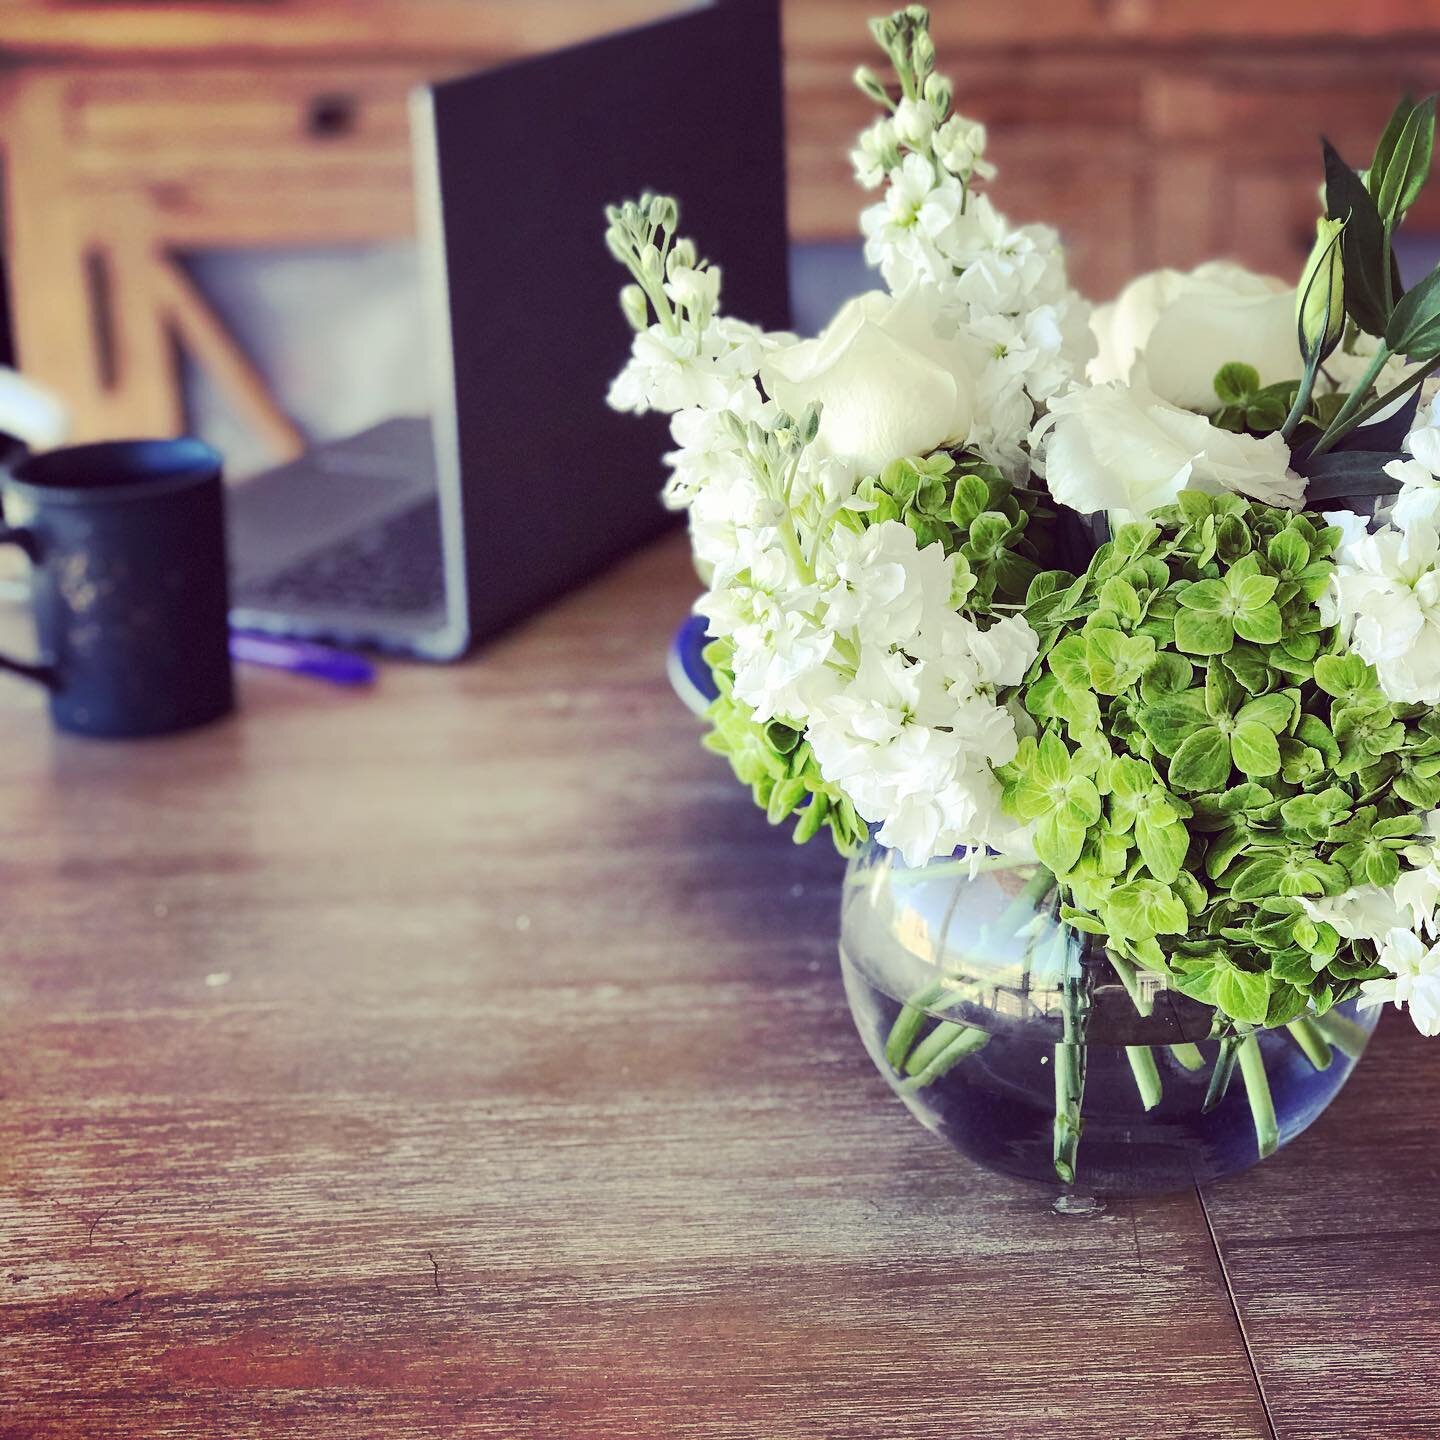 When a client goes the extra mile upon completing a project 🌱🤍💐 it really brightens up my week (+ workspace!)